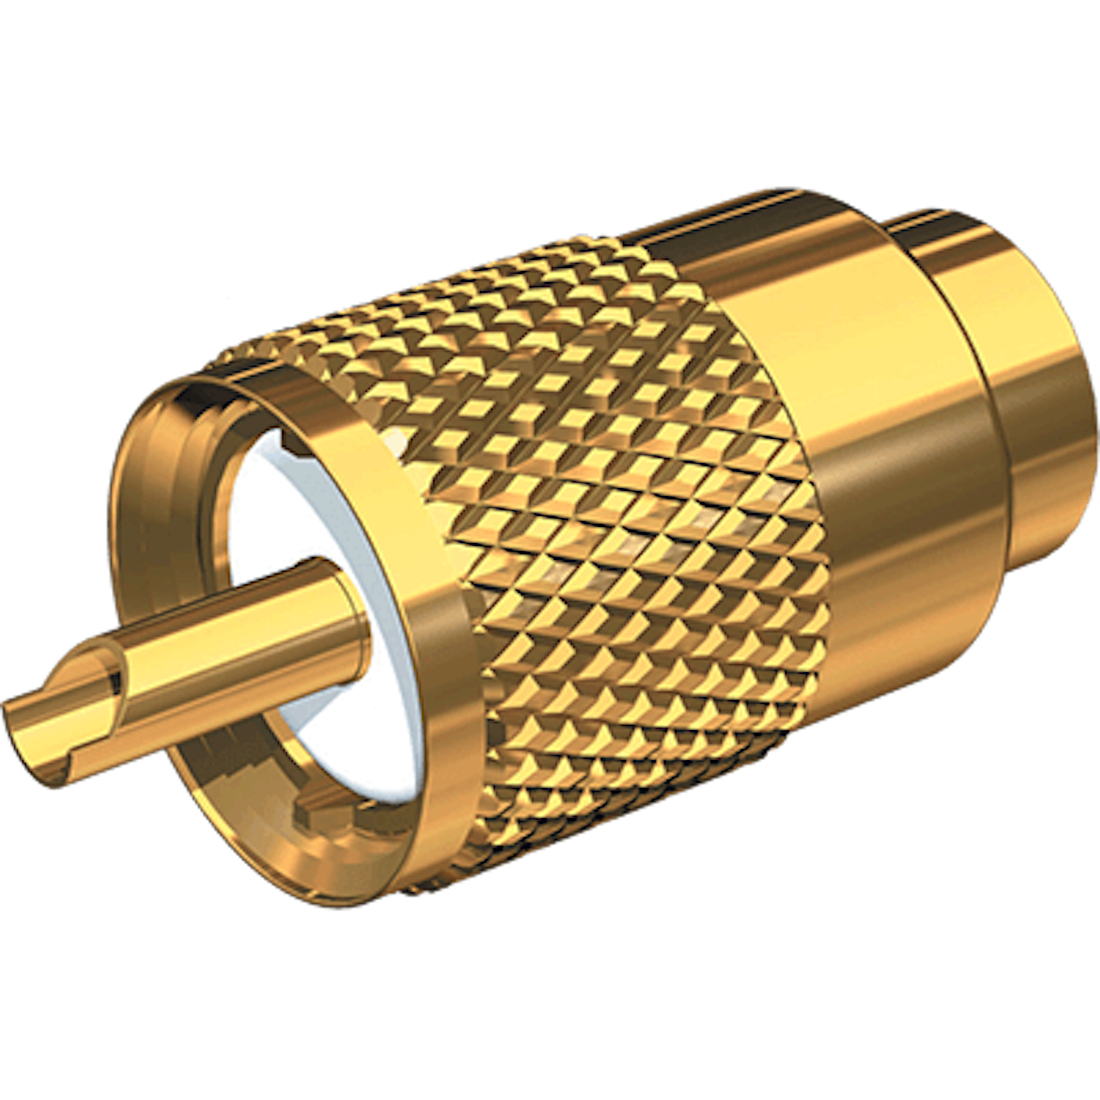 Shakespeare PL-259-58-G Gold Solder-Type Connector w/UG175 Adapter & DooDad Cable Strain Relief f/RG-58x [PL-259-58-G]